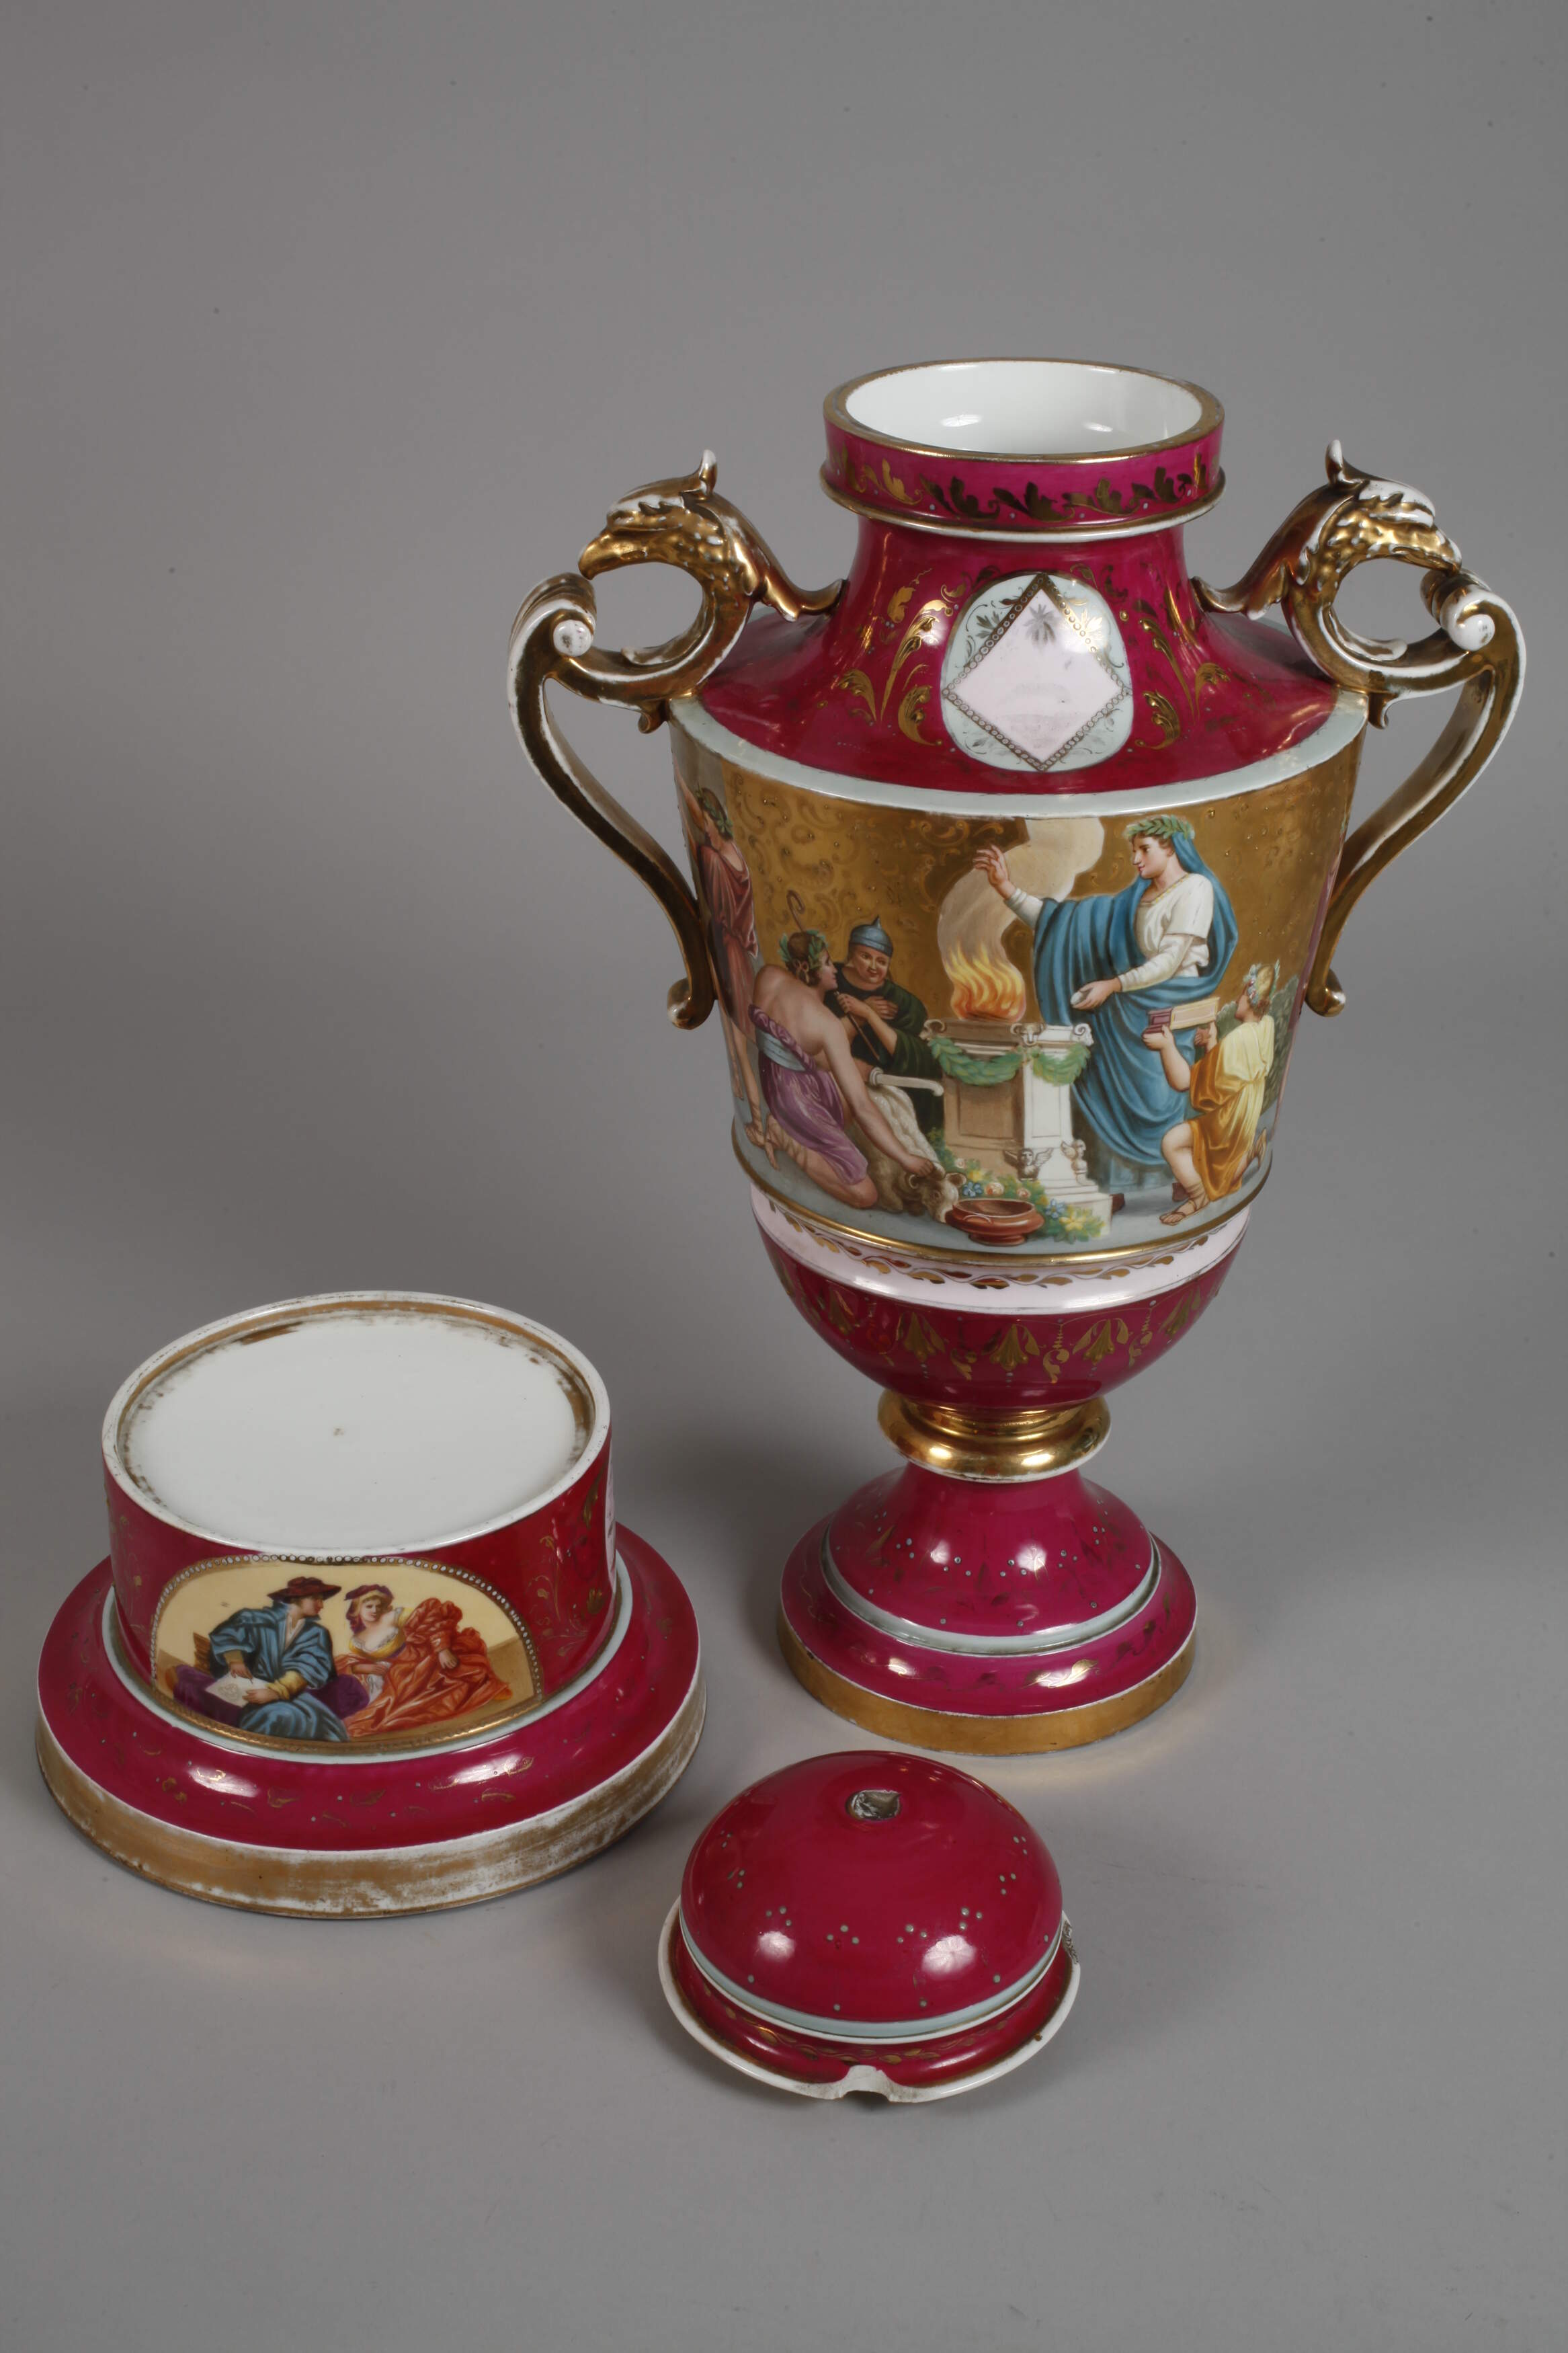 Bohemian ceremonial vase with pedestal in the old Viennese style - Image 5 of 9